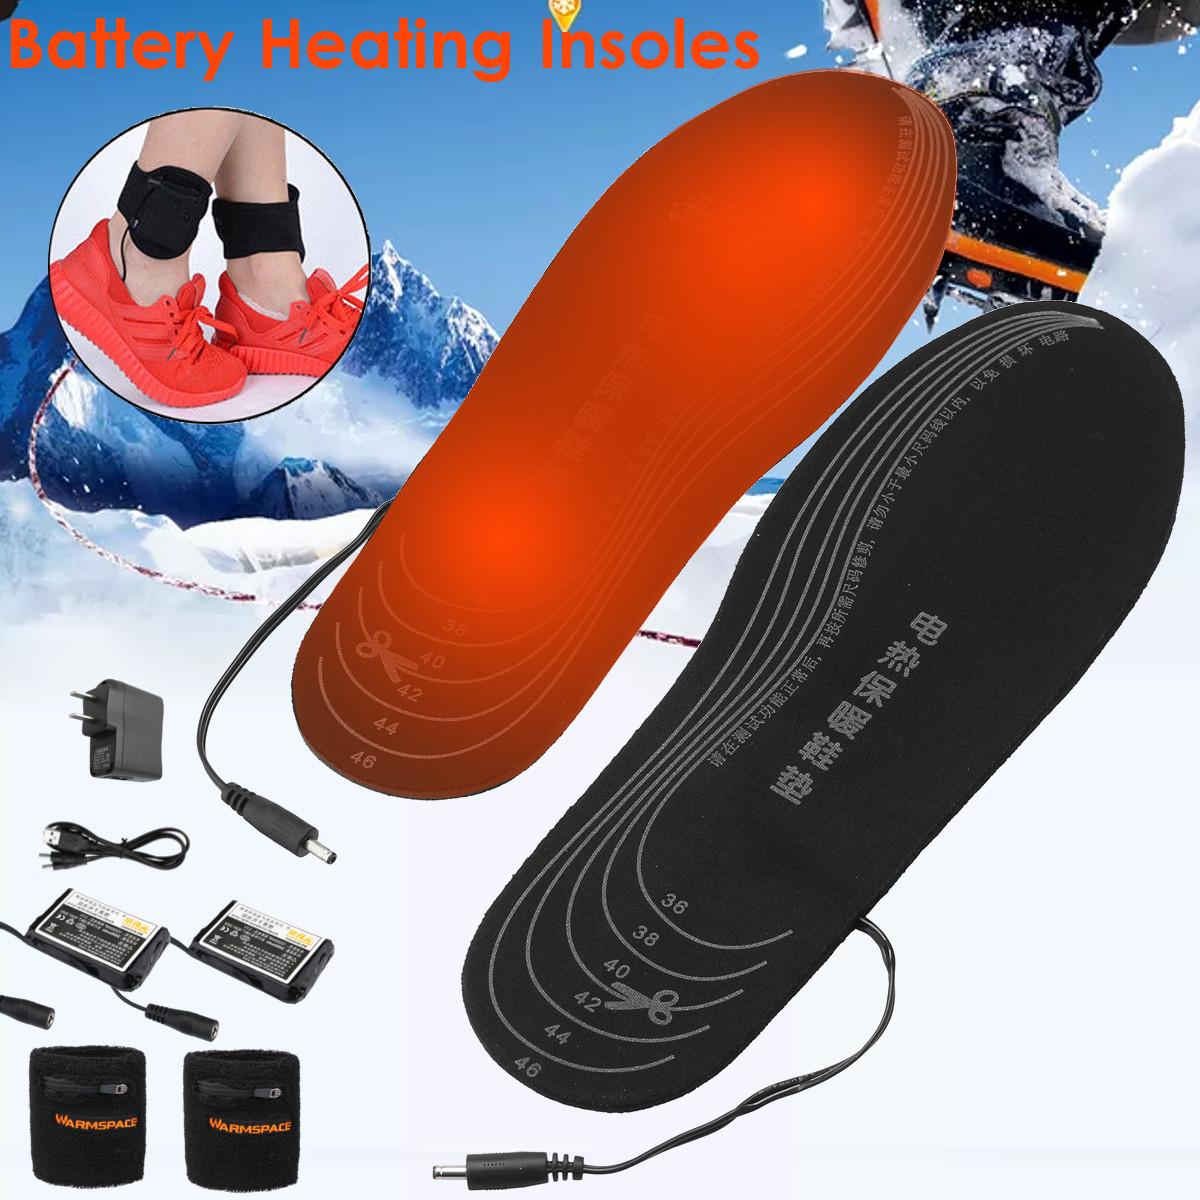 New Electric Heated Shoe Insole Rechargeable Battery Powered Foot